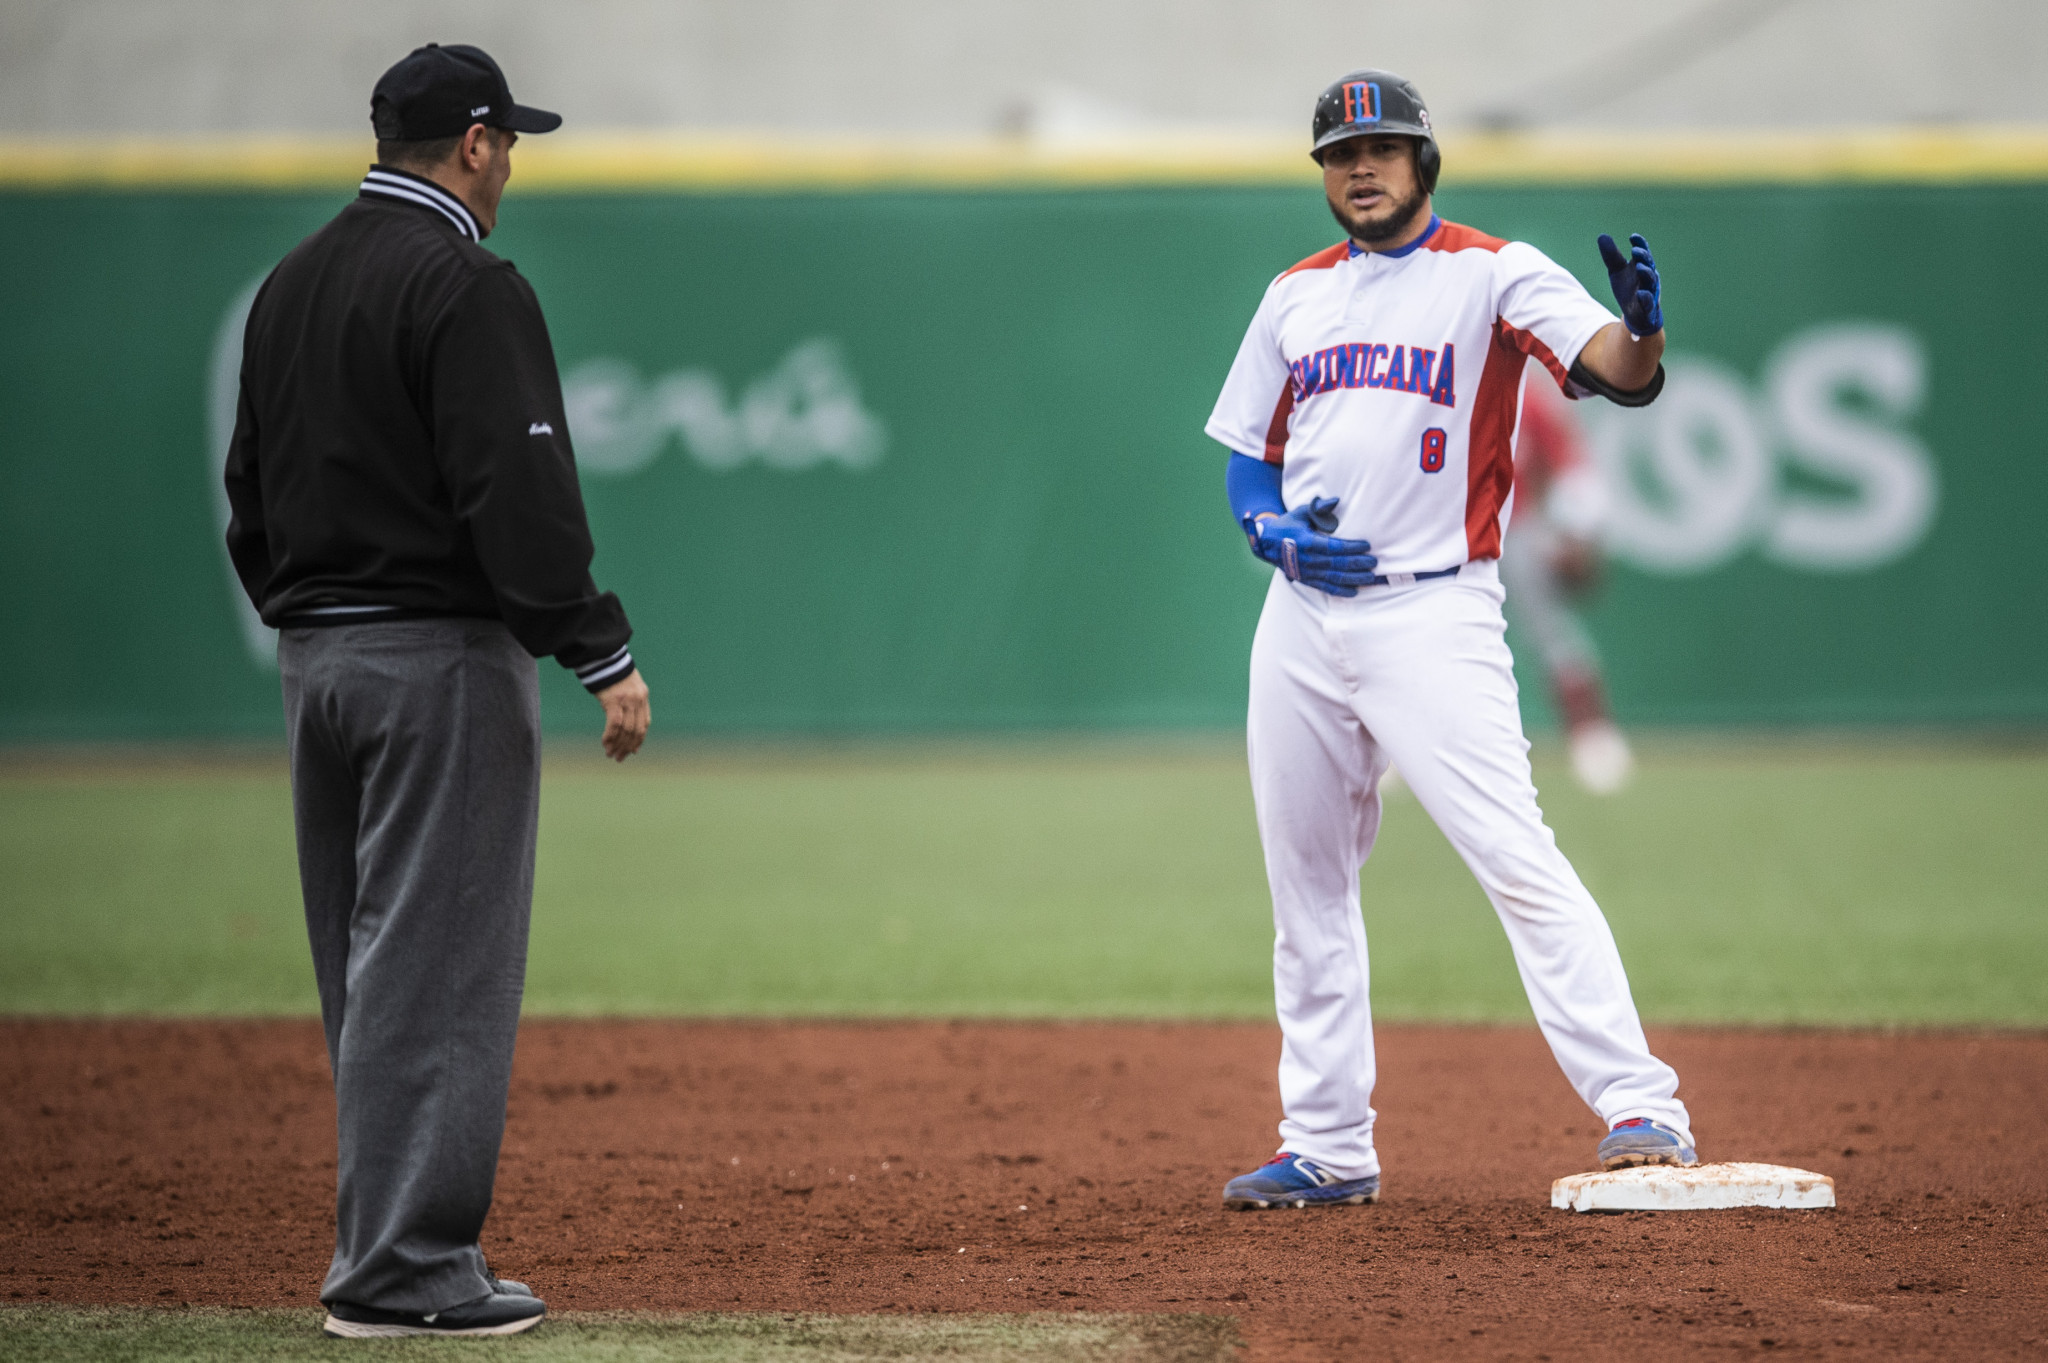 Dominican Republic finished in fifth place in the men's baseball tournament ©Getty Images